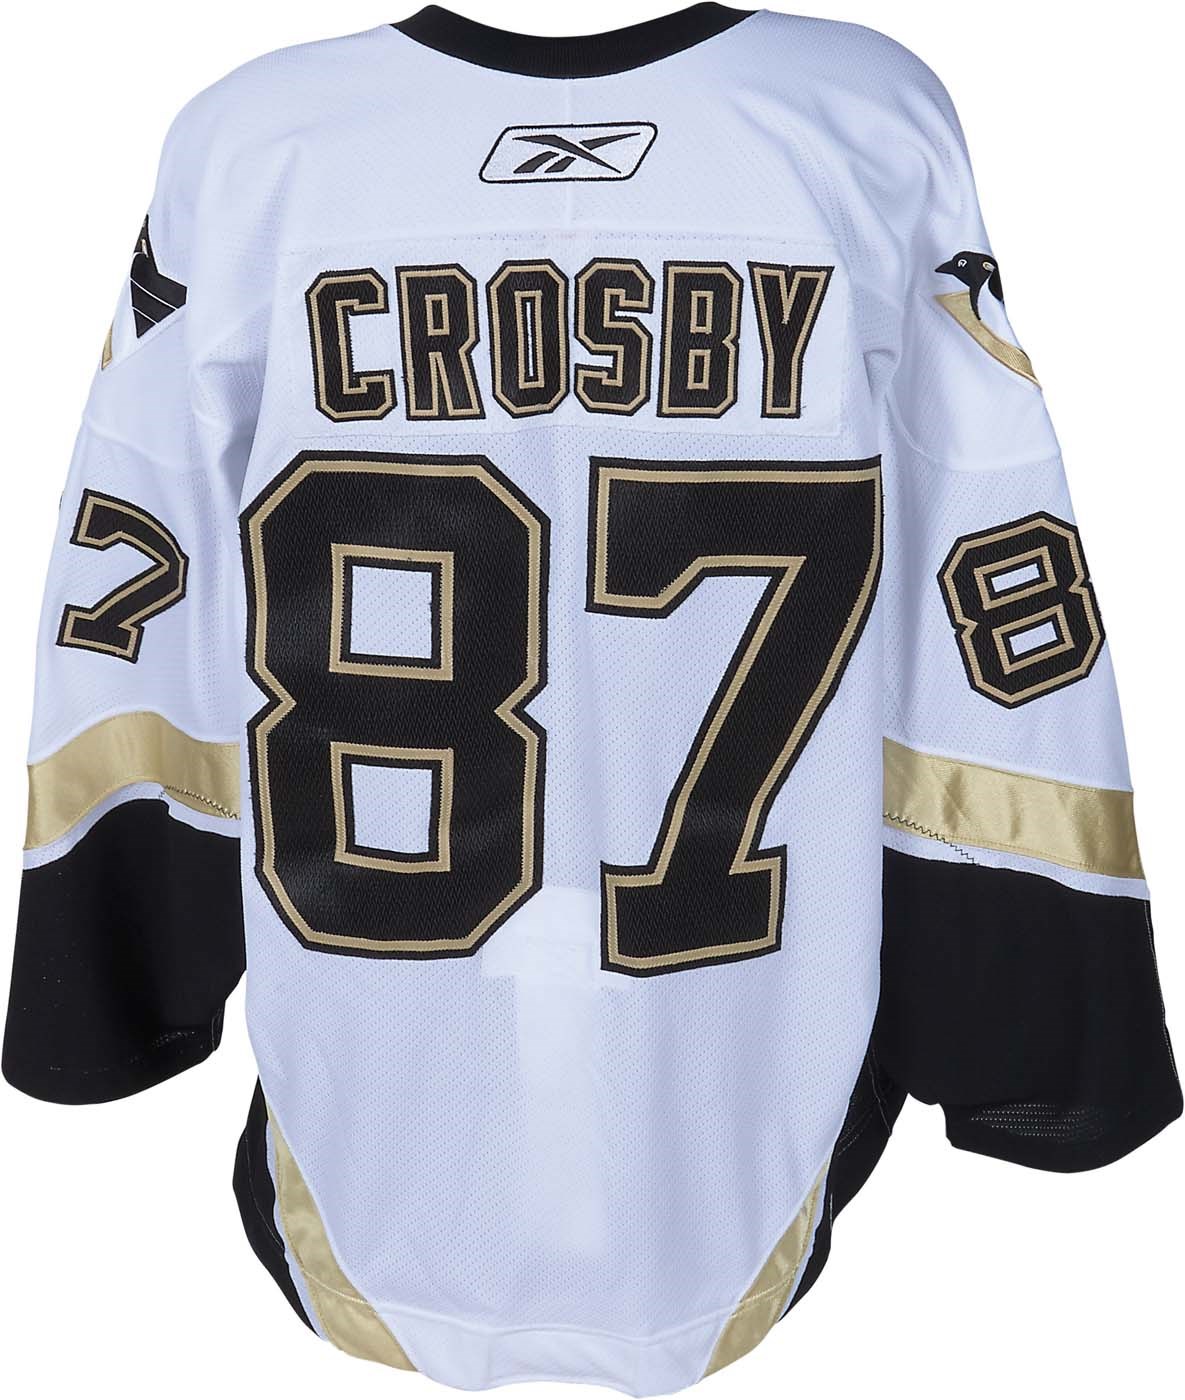 Hockey - 2005-06 Sidney Crosby Pittsburgh Penguins Game Issued Rookie Jersey